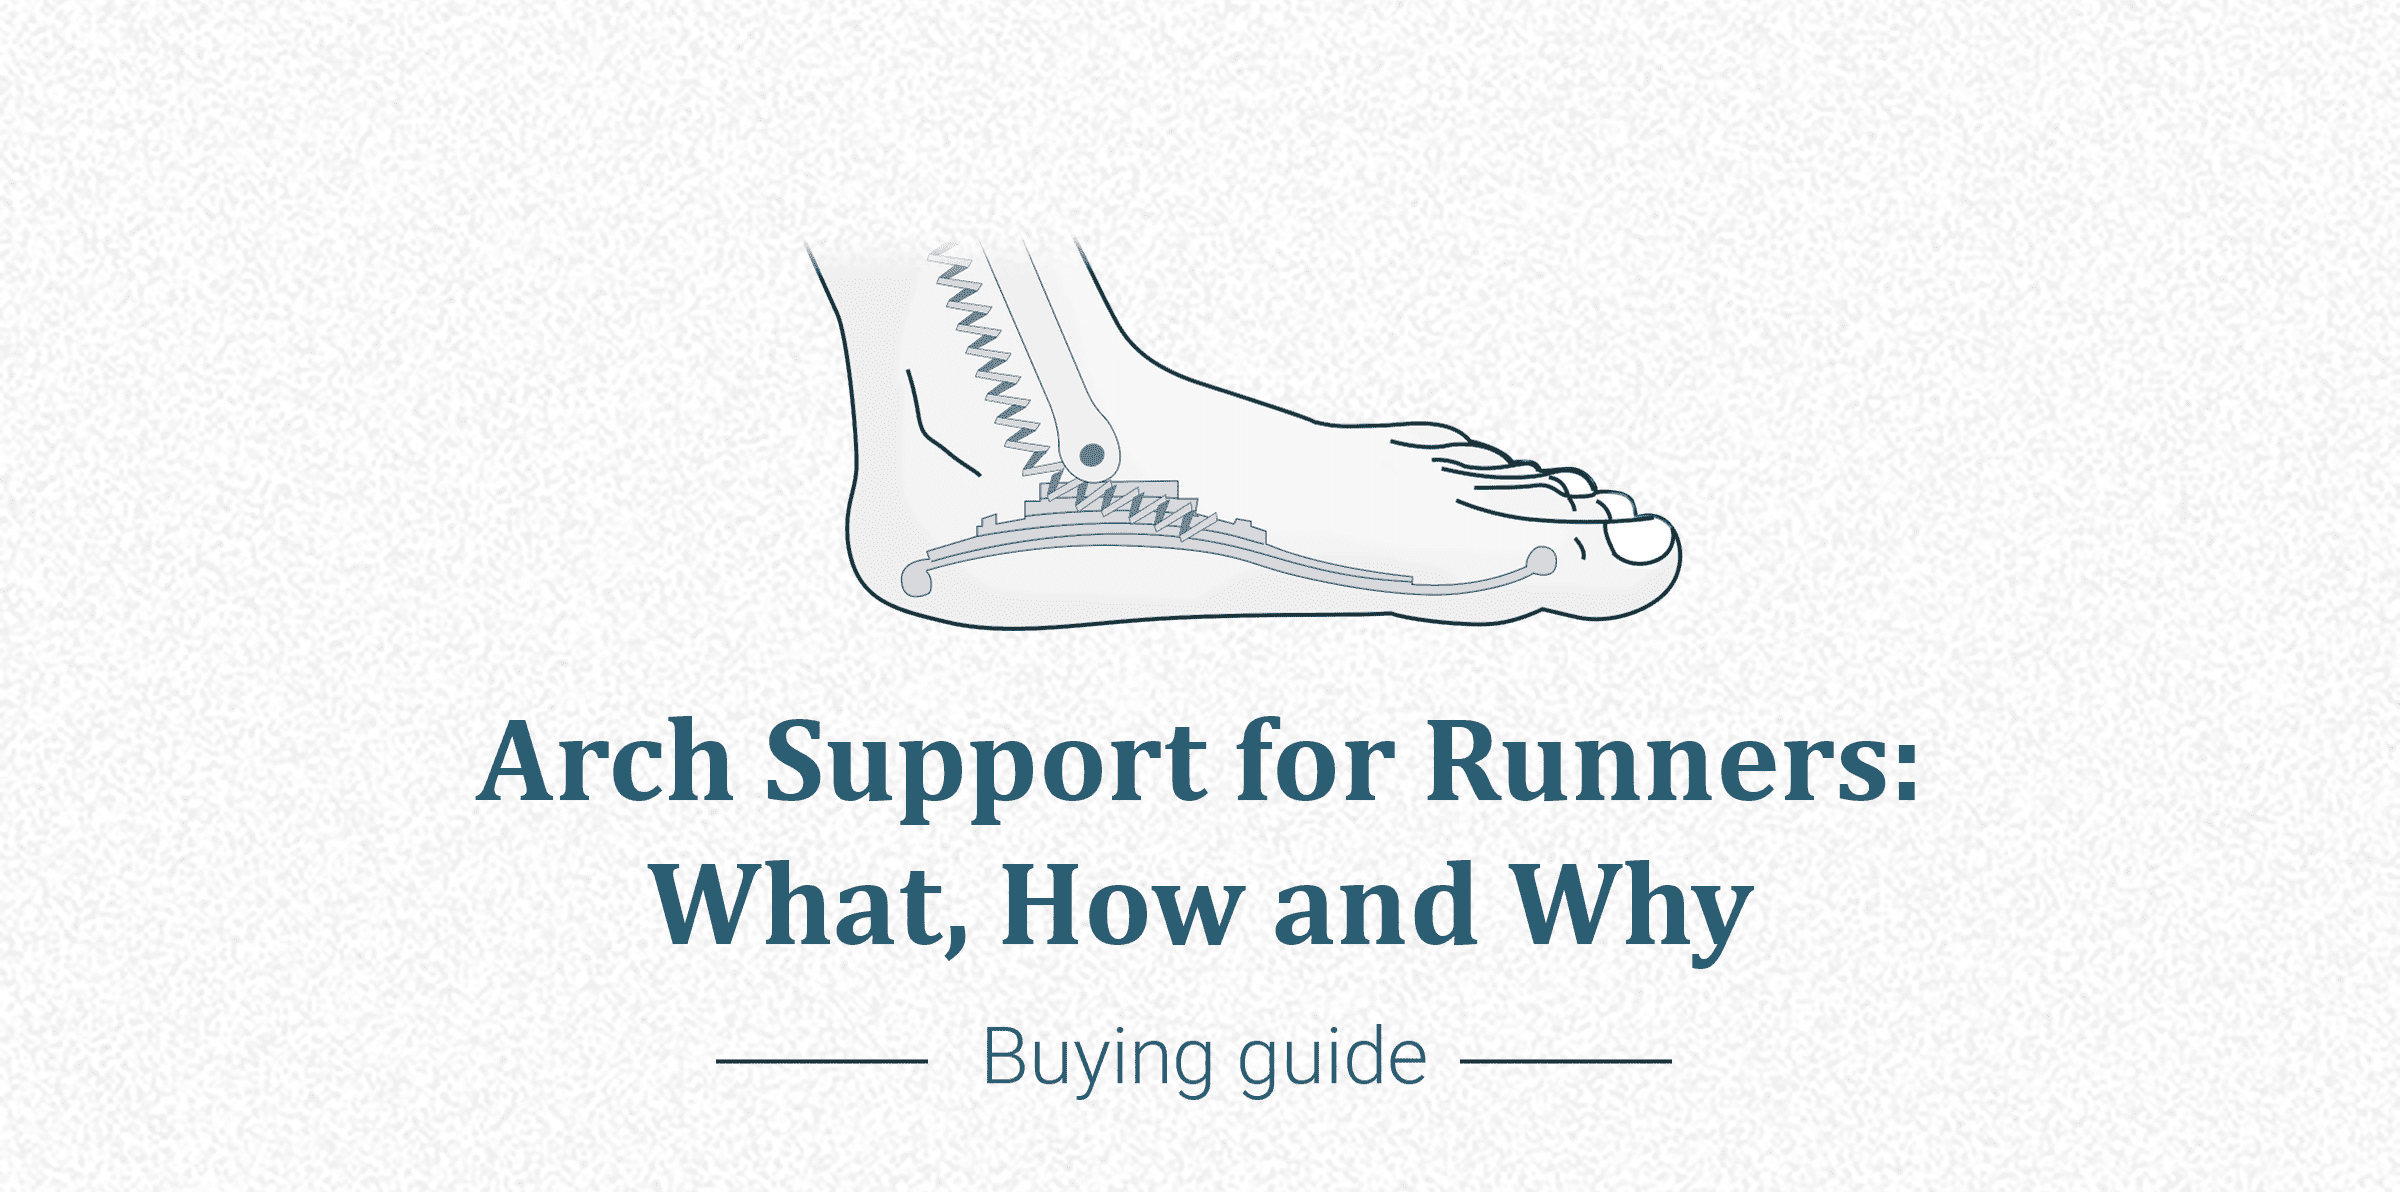 What is Arch Support